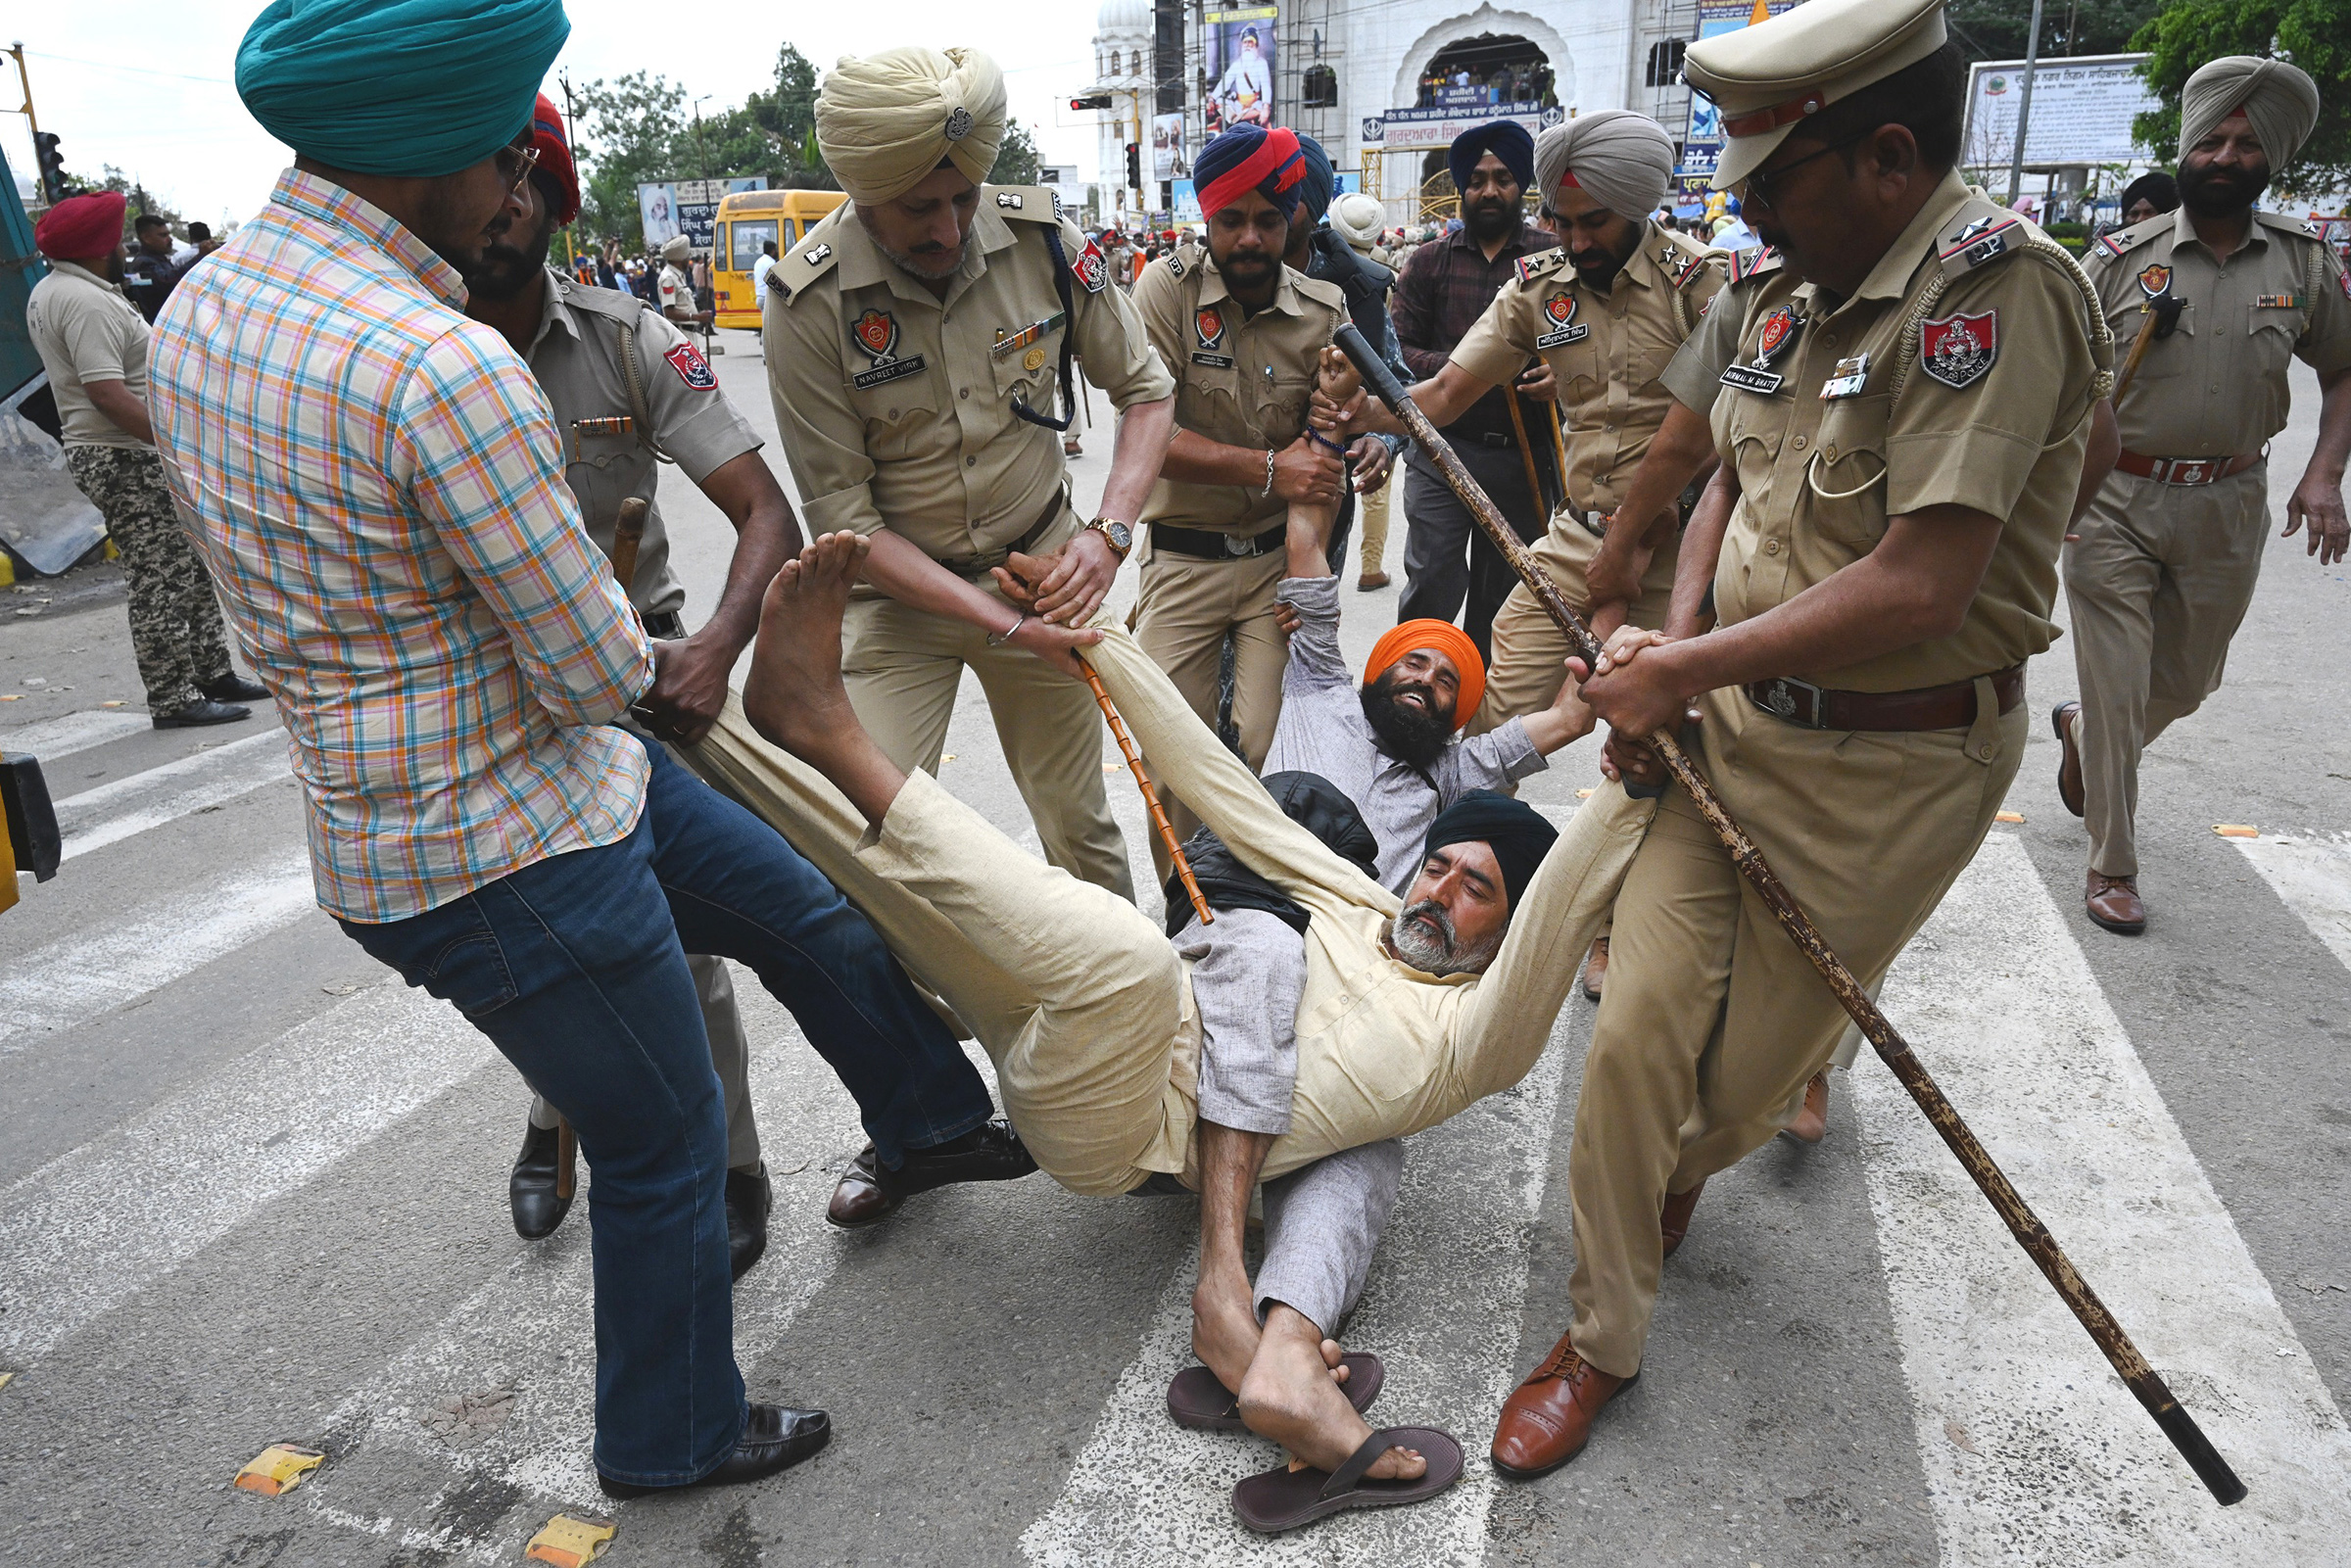 Punjab police forcibly remove supporters protesting against police action against amritpal singh in mohali, india on march 21.